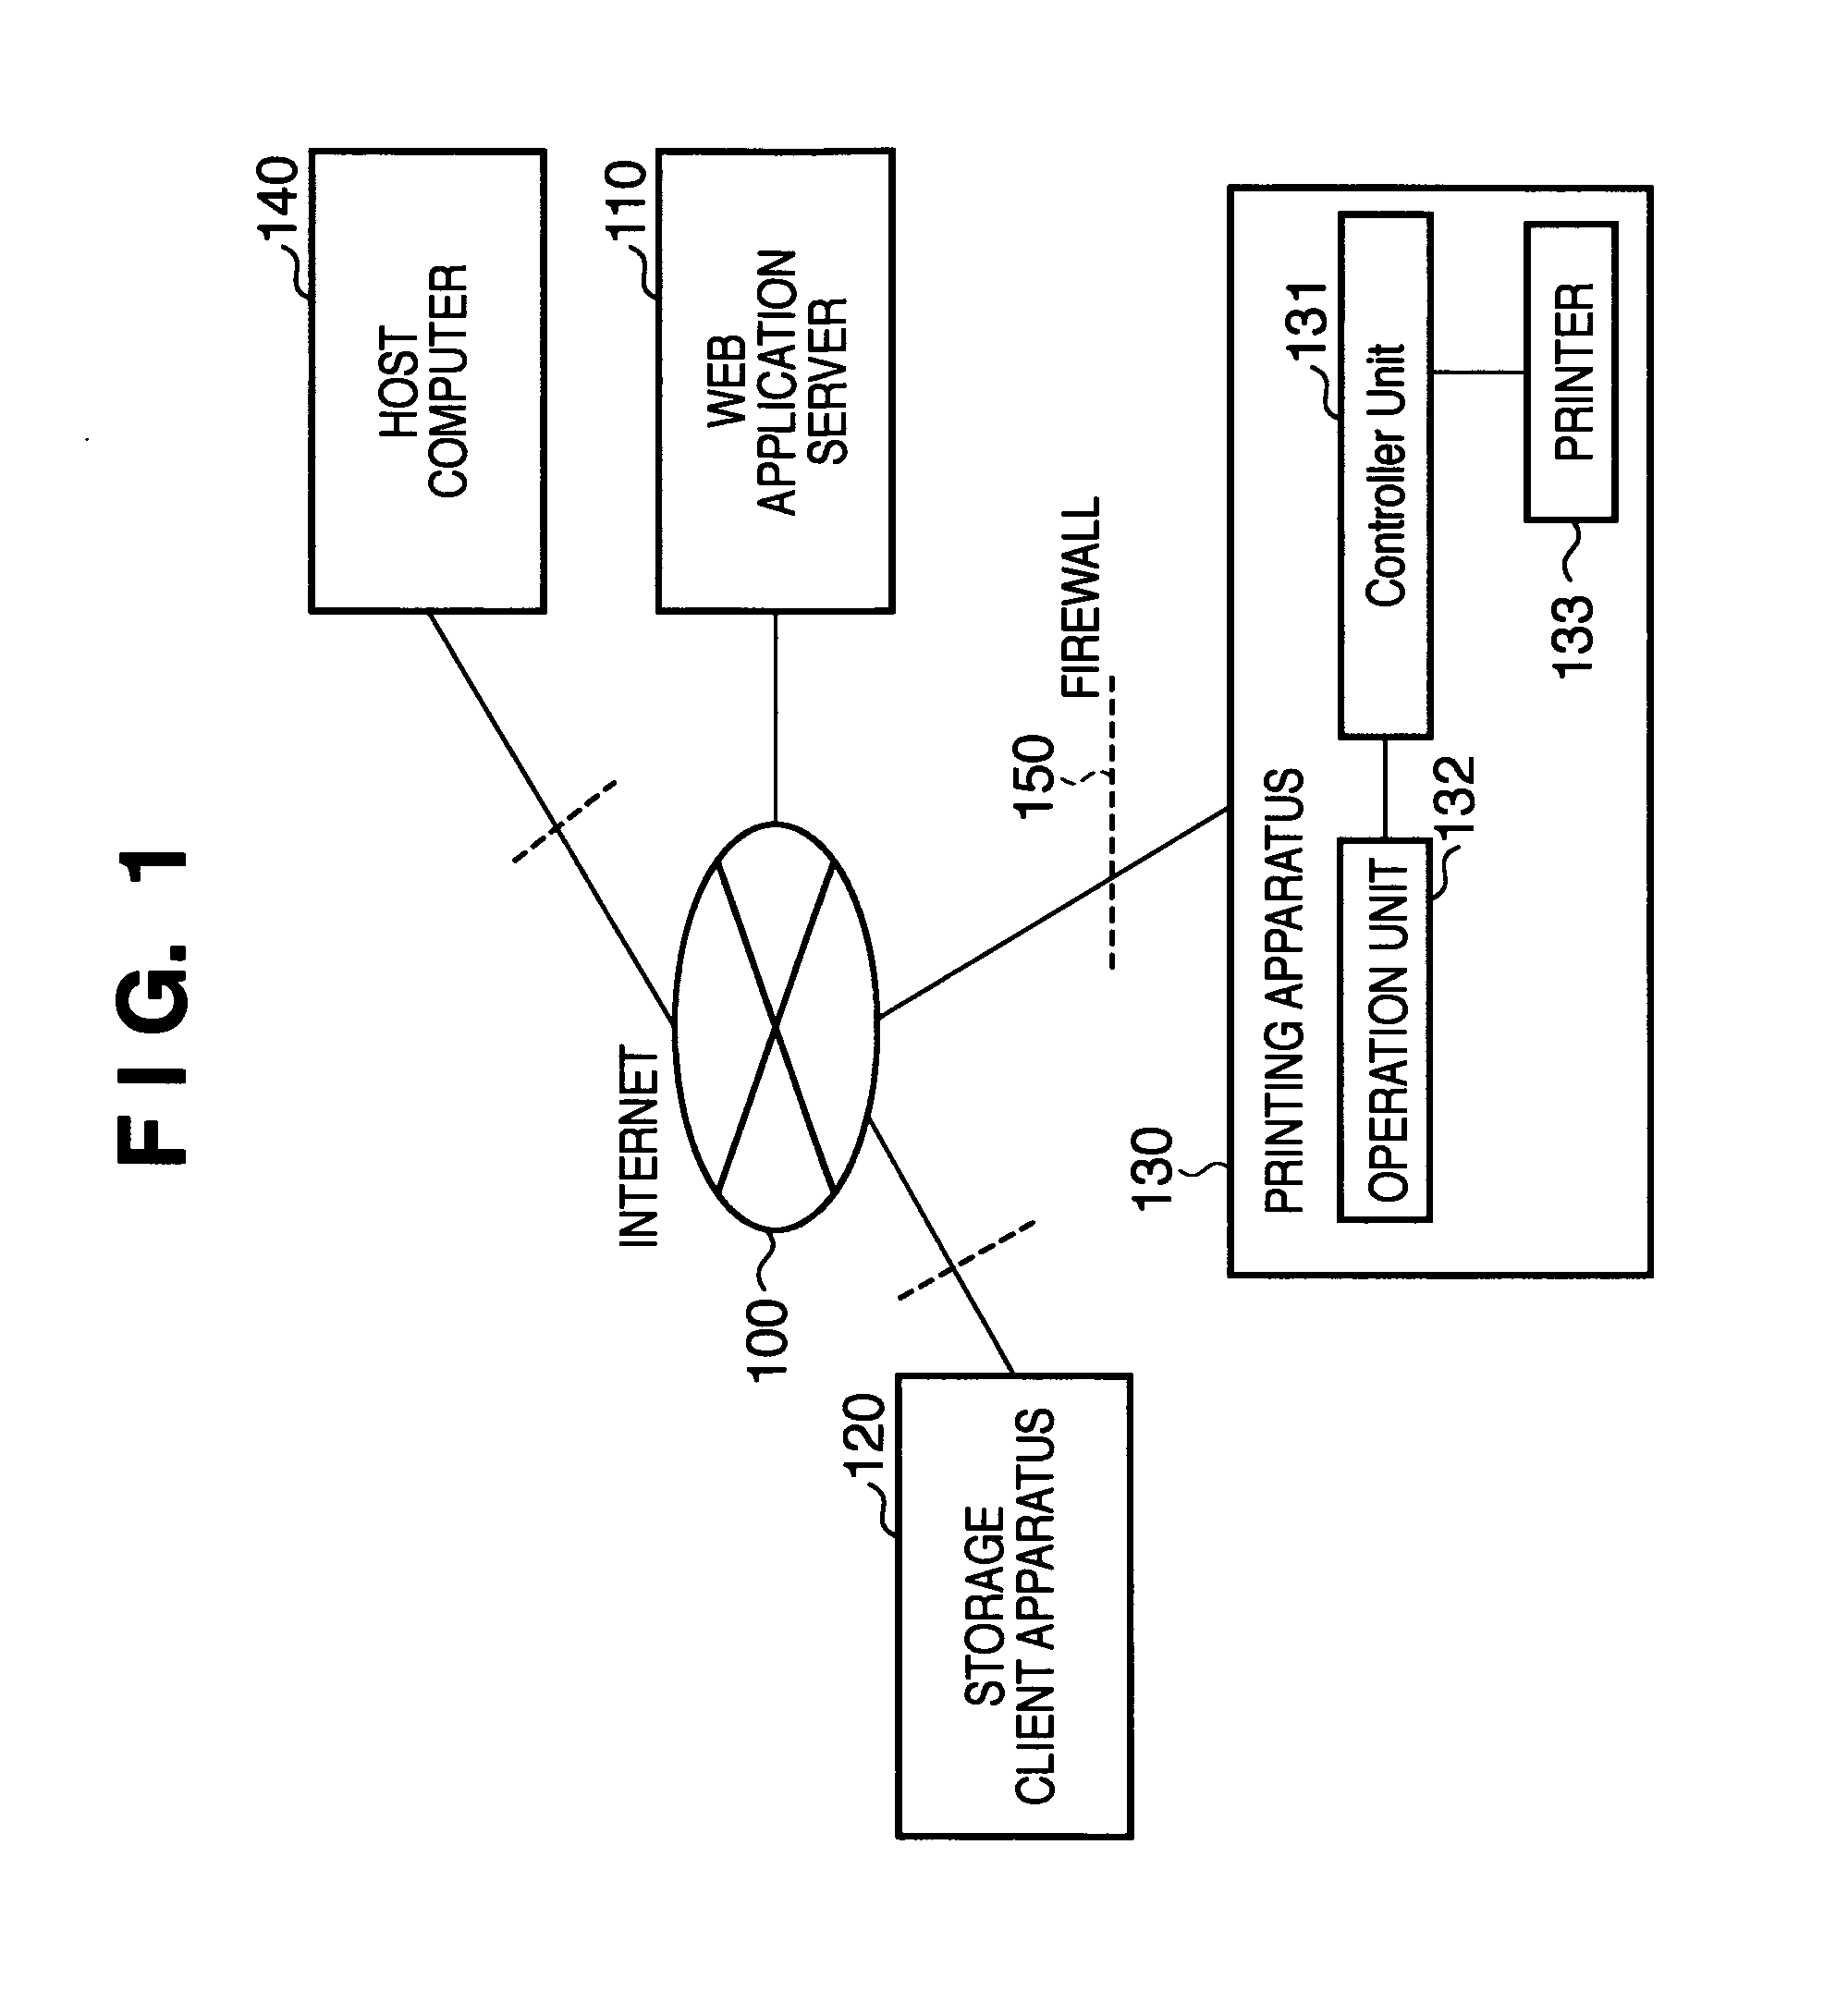 Printing system, control method, storage client apparatus, printing apparatus, and web application server